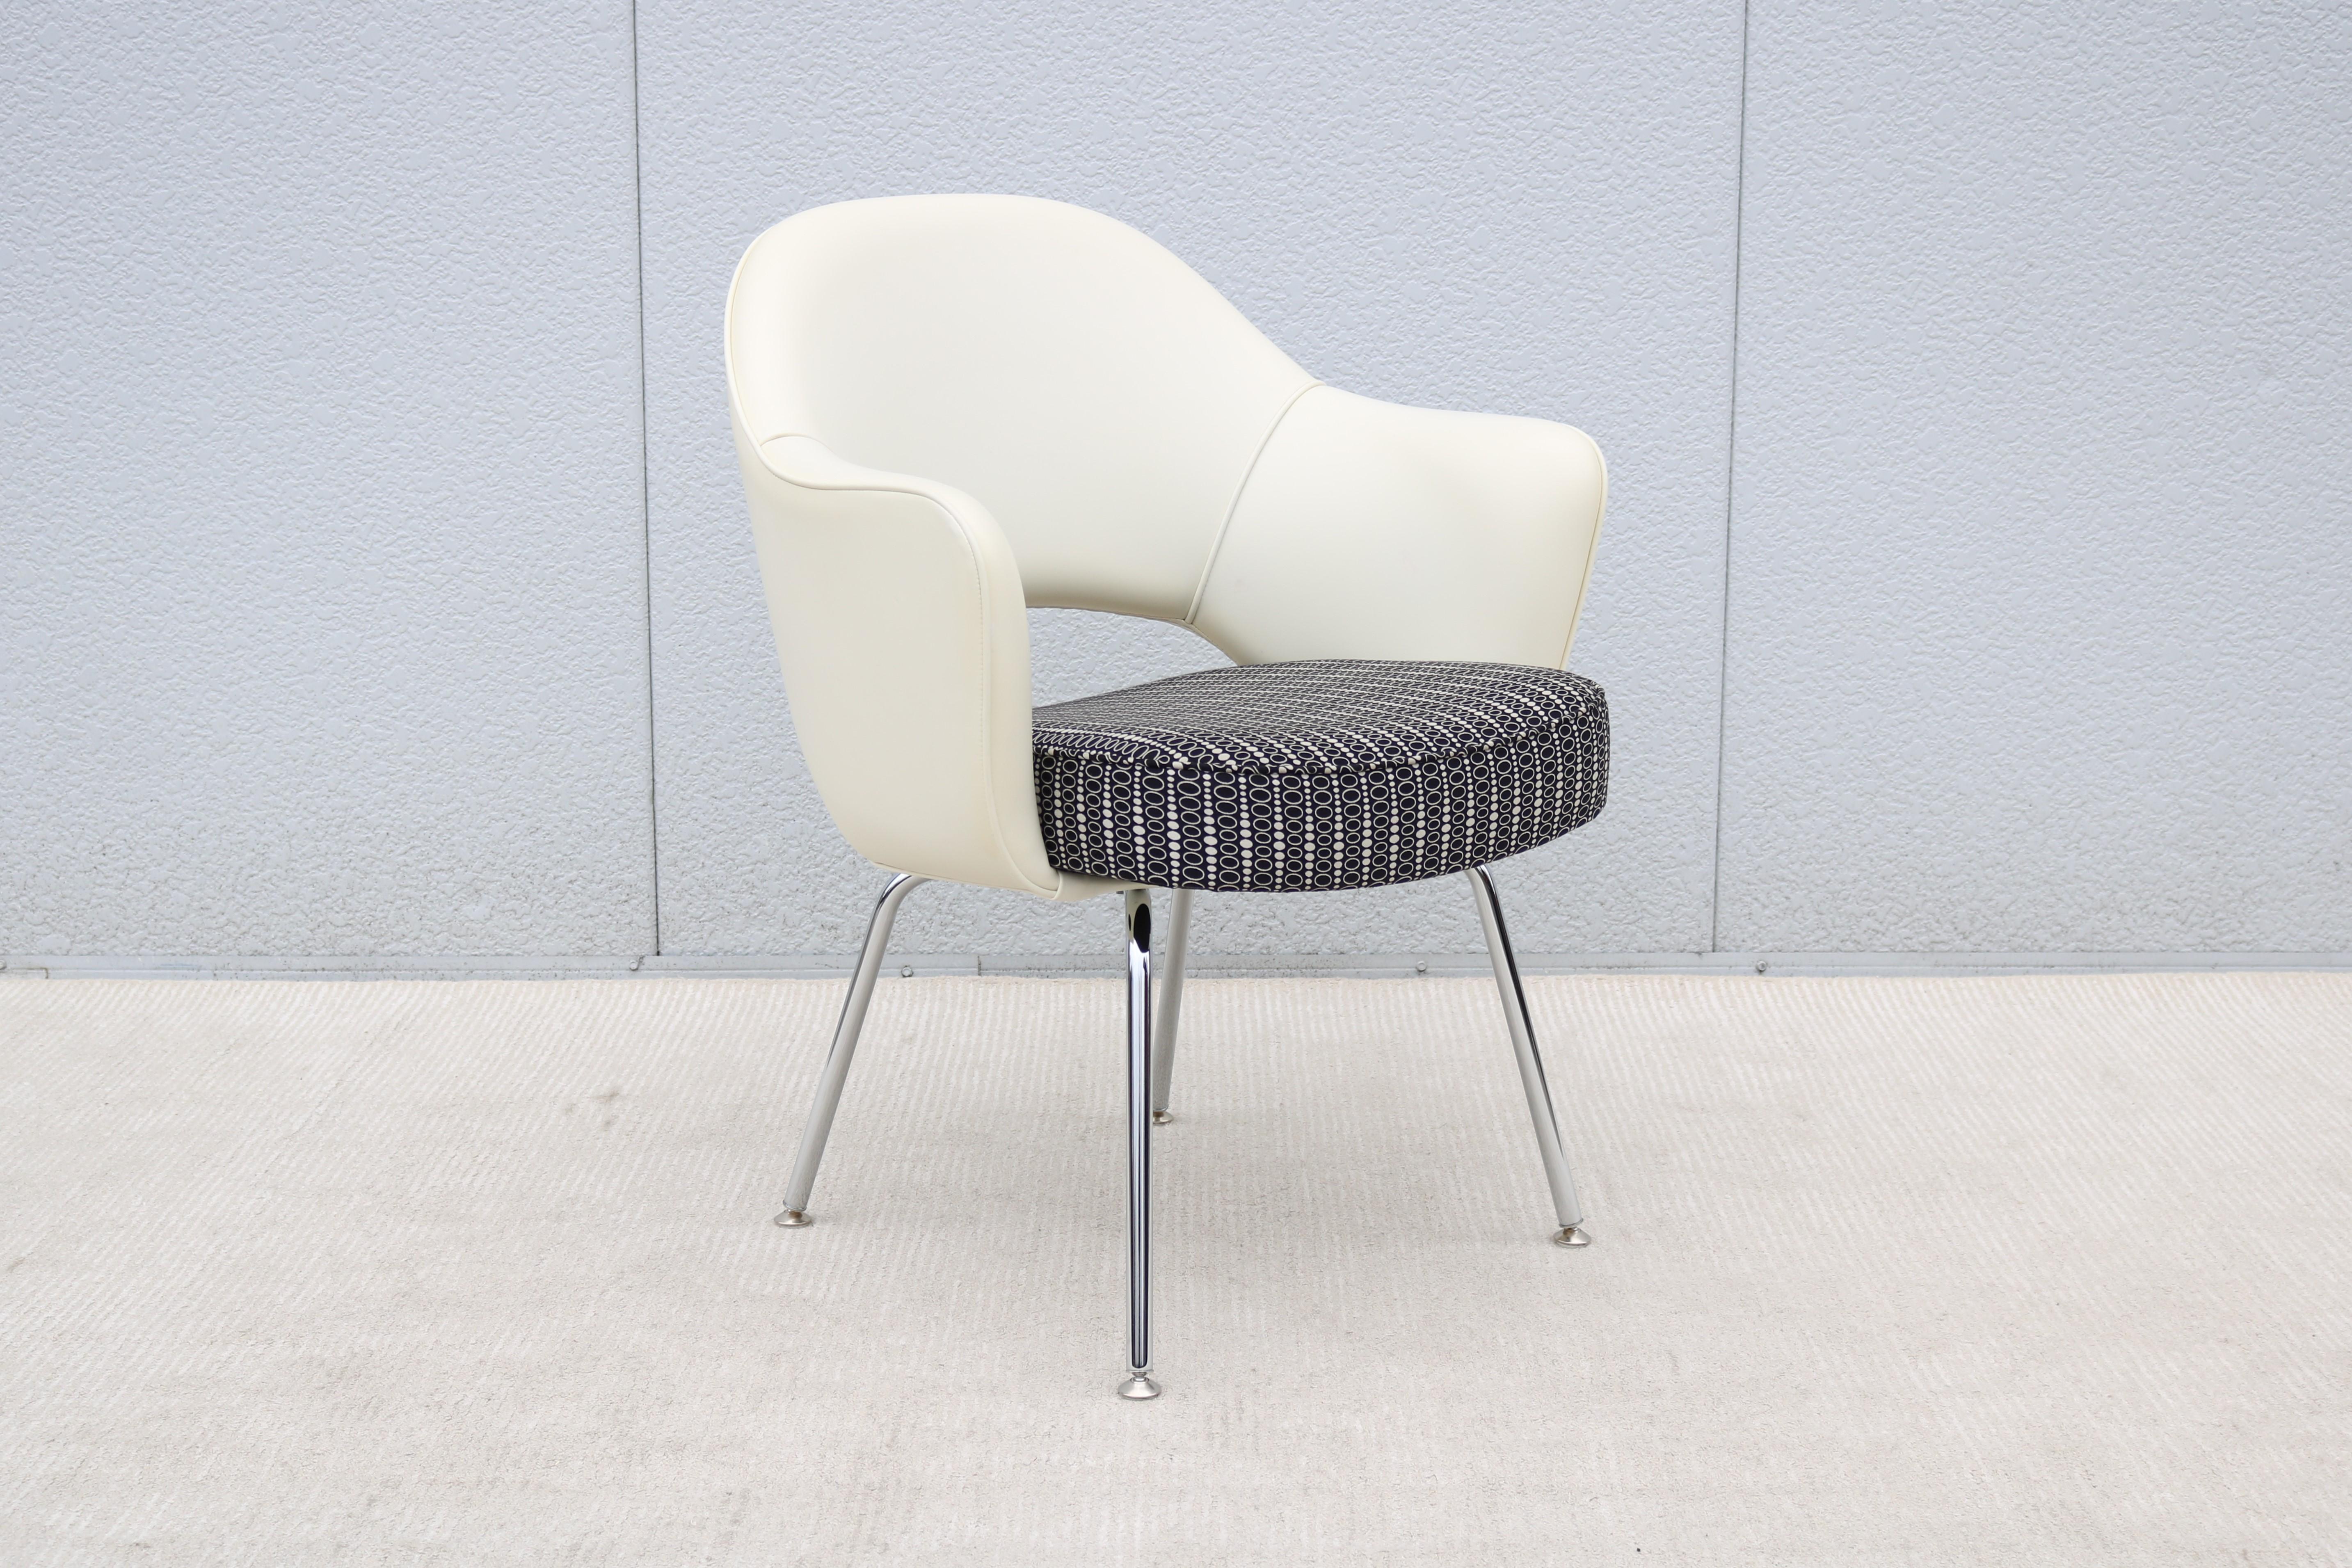 Stunning authentic mid-century modern Saarinen Executive armchair by Knoll.
One of Knoll's most popular designs that achieved supreme comfort through the shape of its shell.
It was introduced in 1950 a midcentury modern classic of the Eames era.
The